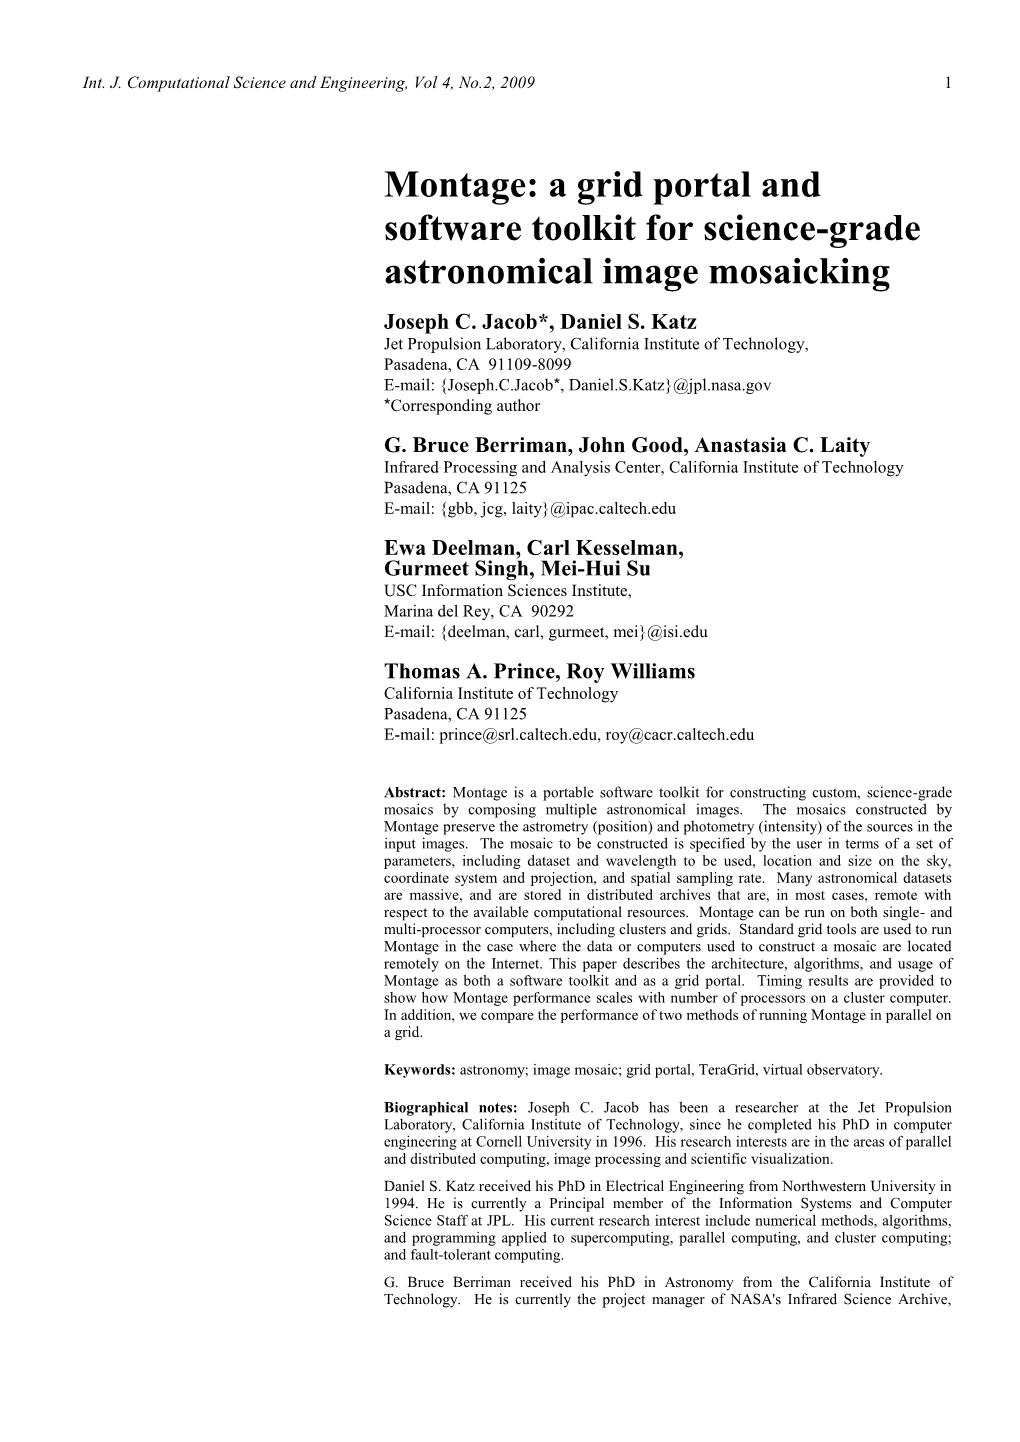 Montage: a Grid Portal and Software Toolkit for Science-Grade Astronomical Image Mosaicking Joseph C